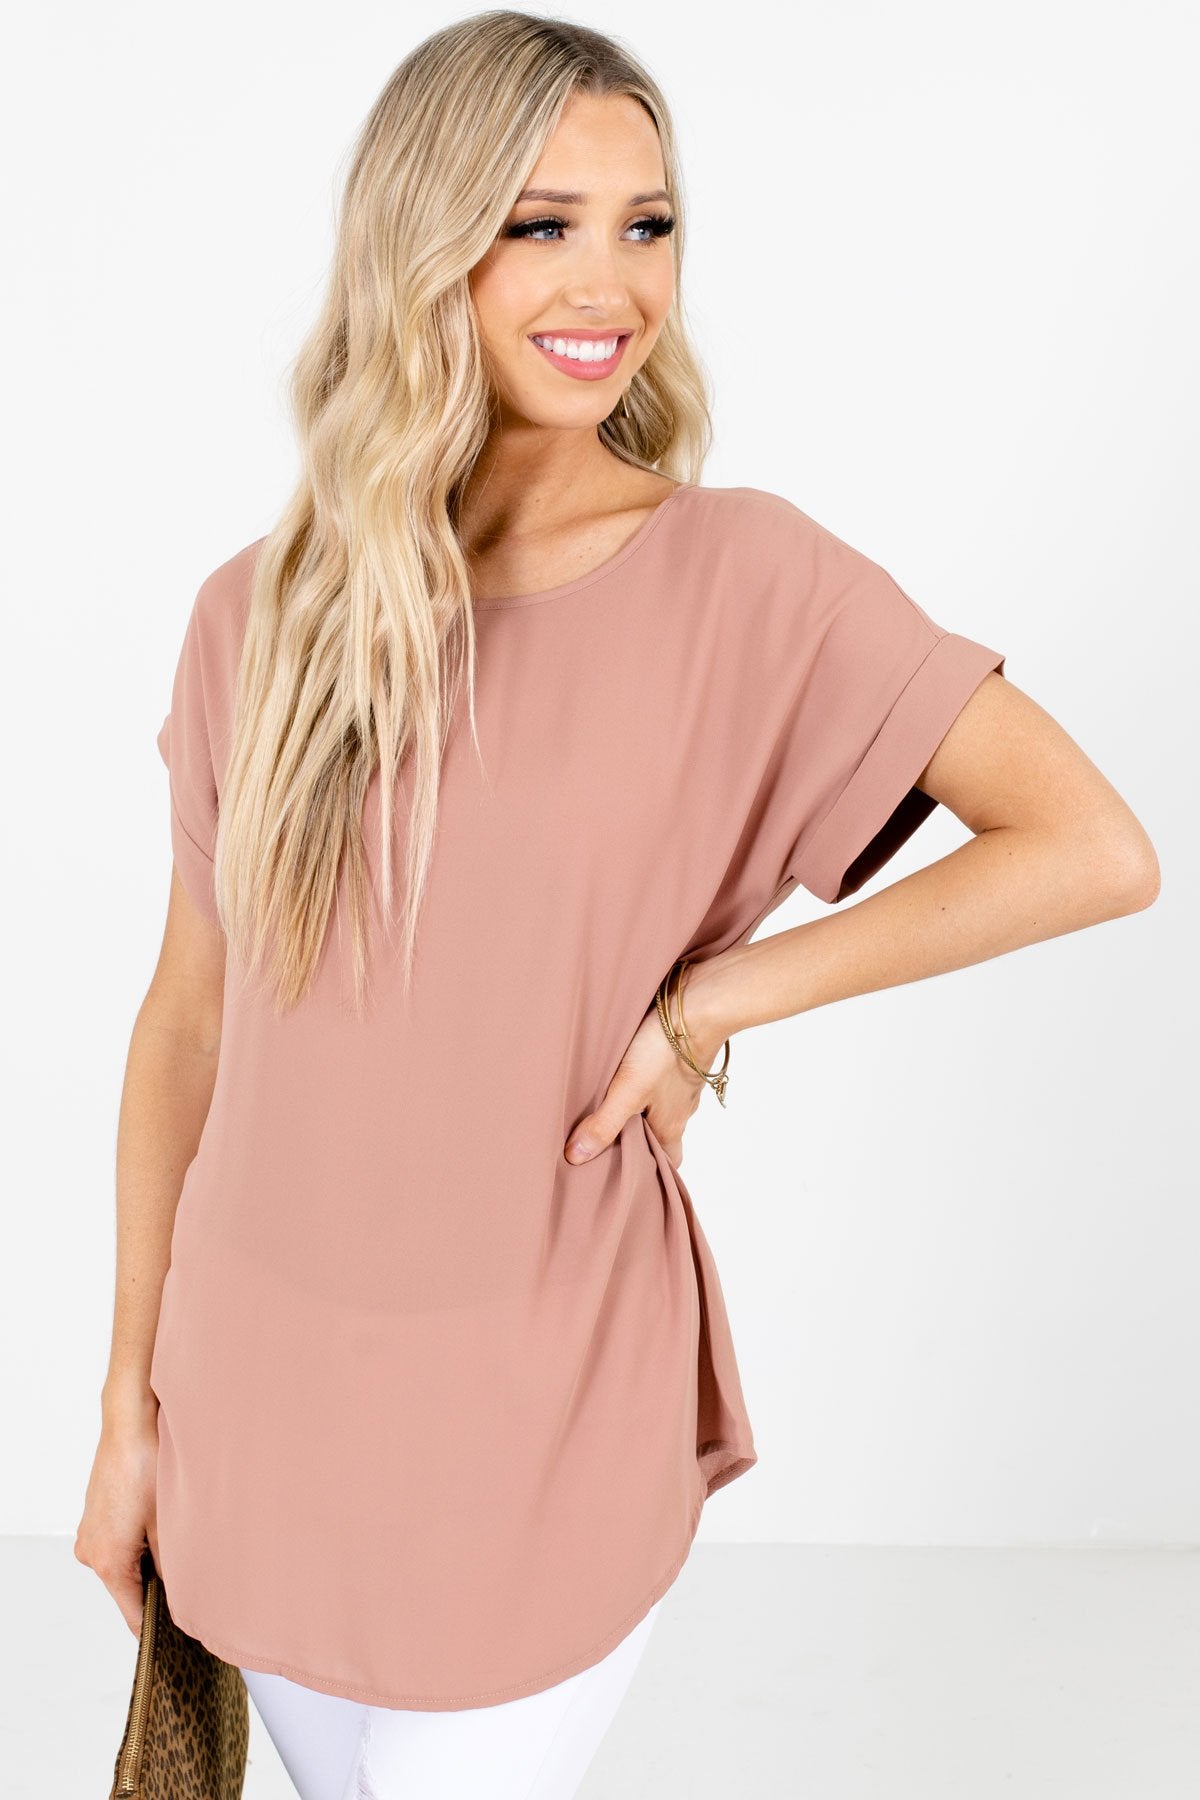 Tan Brown Lightweight and Flowy Boutique Blouses for Women